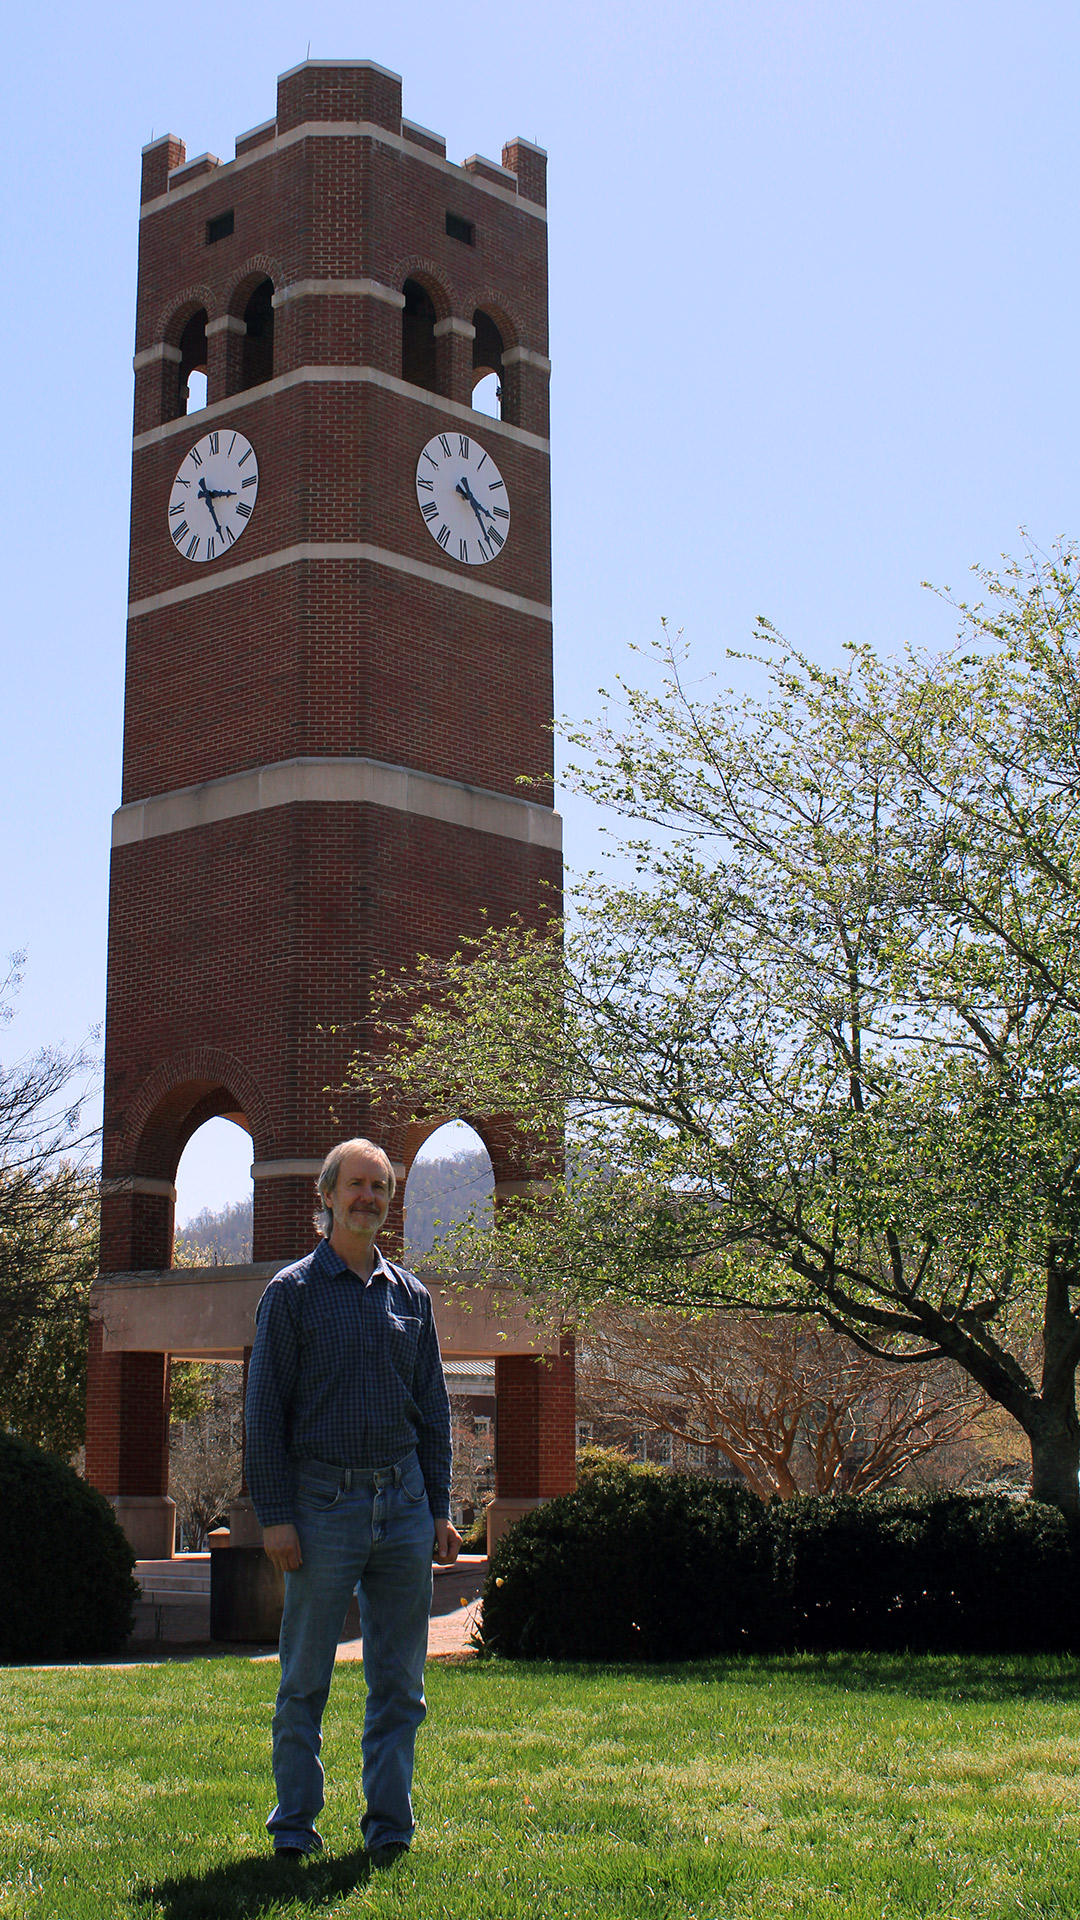 Rash the teacher: Ron Rash in front of the iconic Alumni Tower at Western Carolina University, where he teaches creative writing and Appalachian cultural studies (photograph by Marianne Leek)